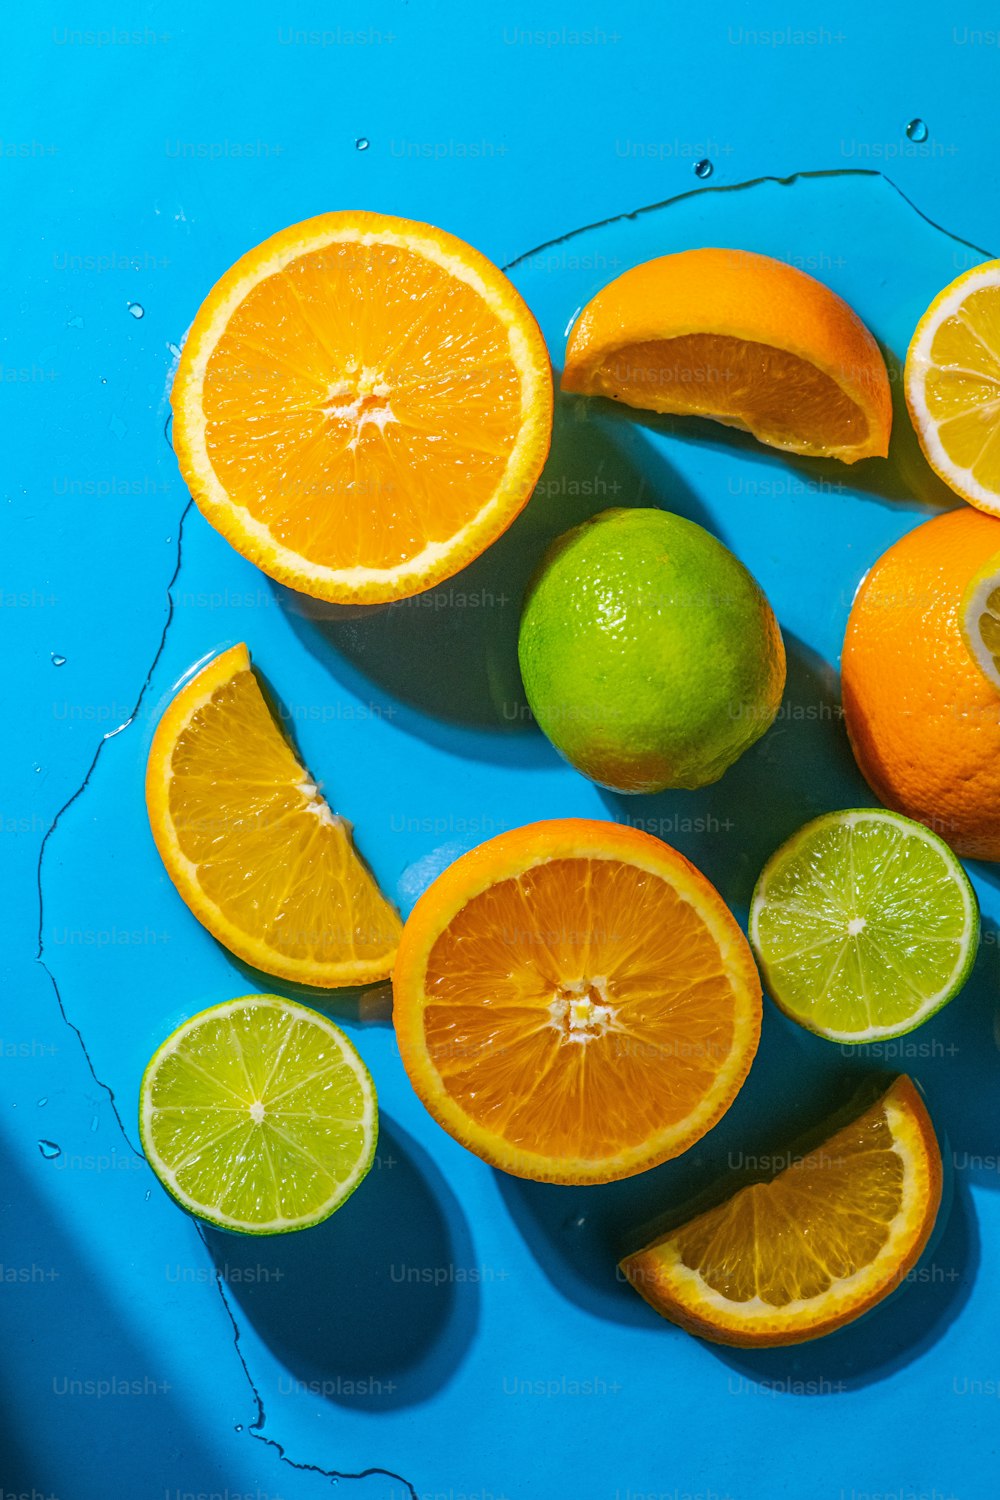 a group of oranges and limes on a blue surface